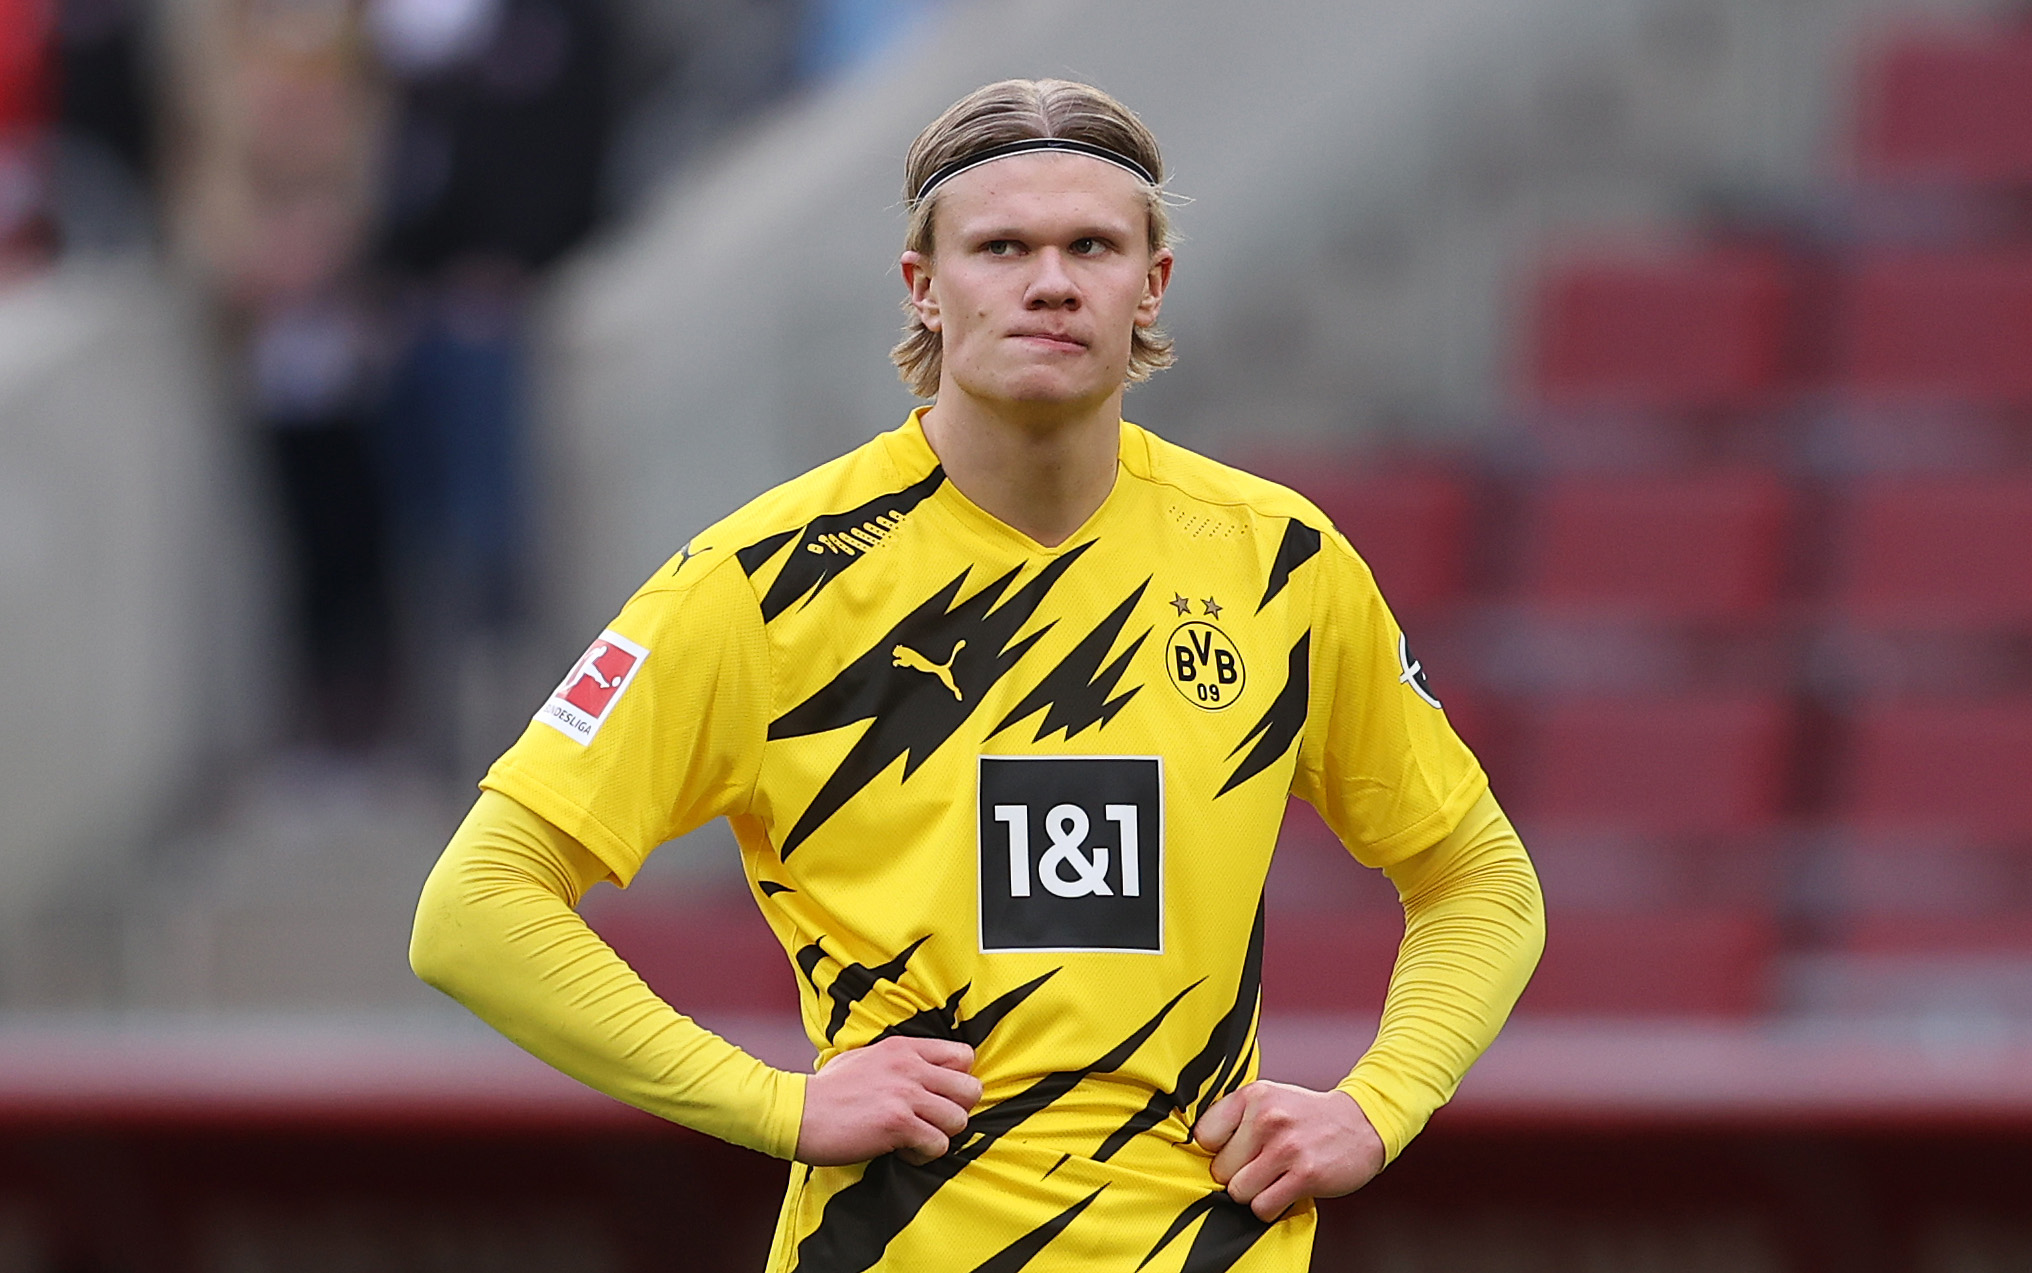 Erling Haaland on March 20, 2021 in Cologne, Germany. | Source: Getty Images